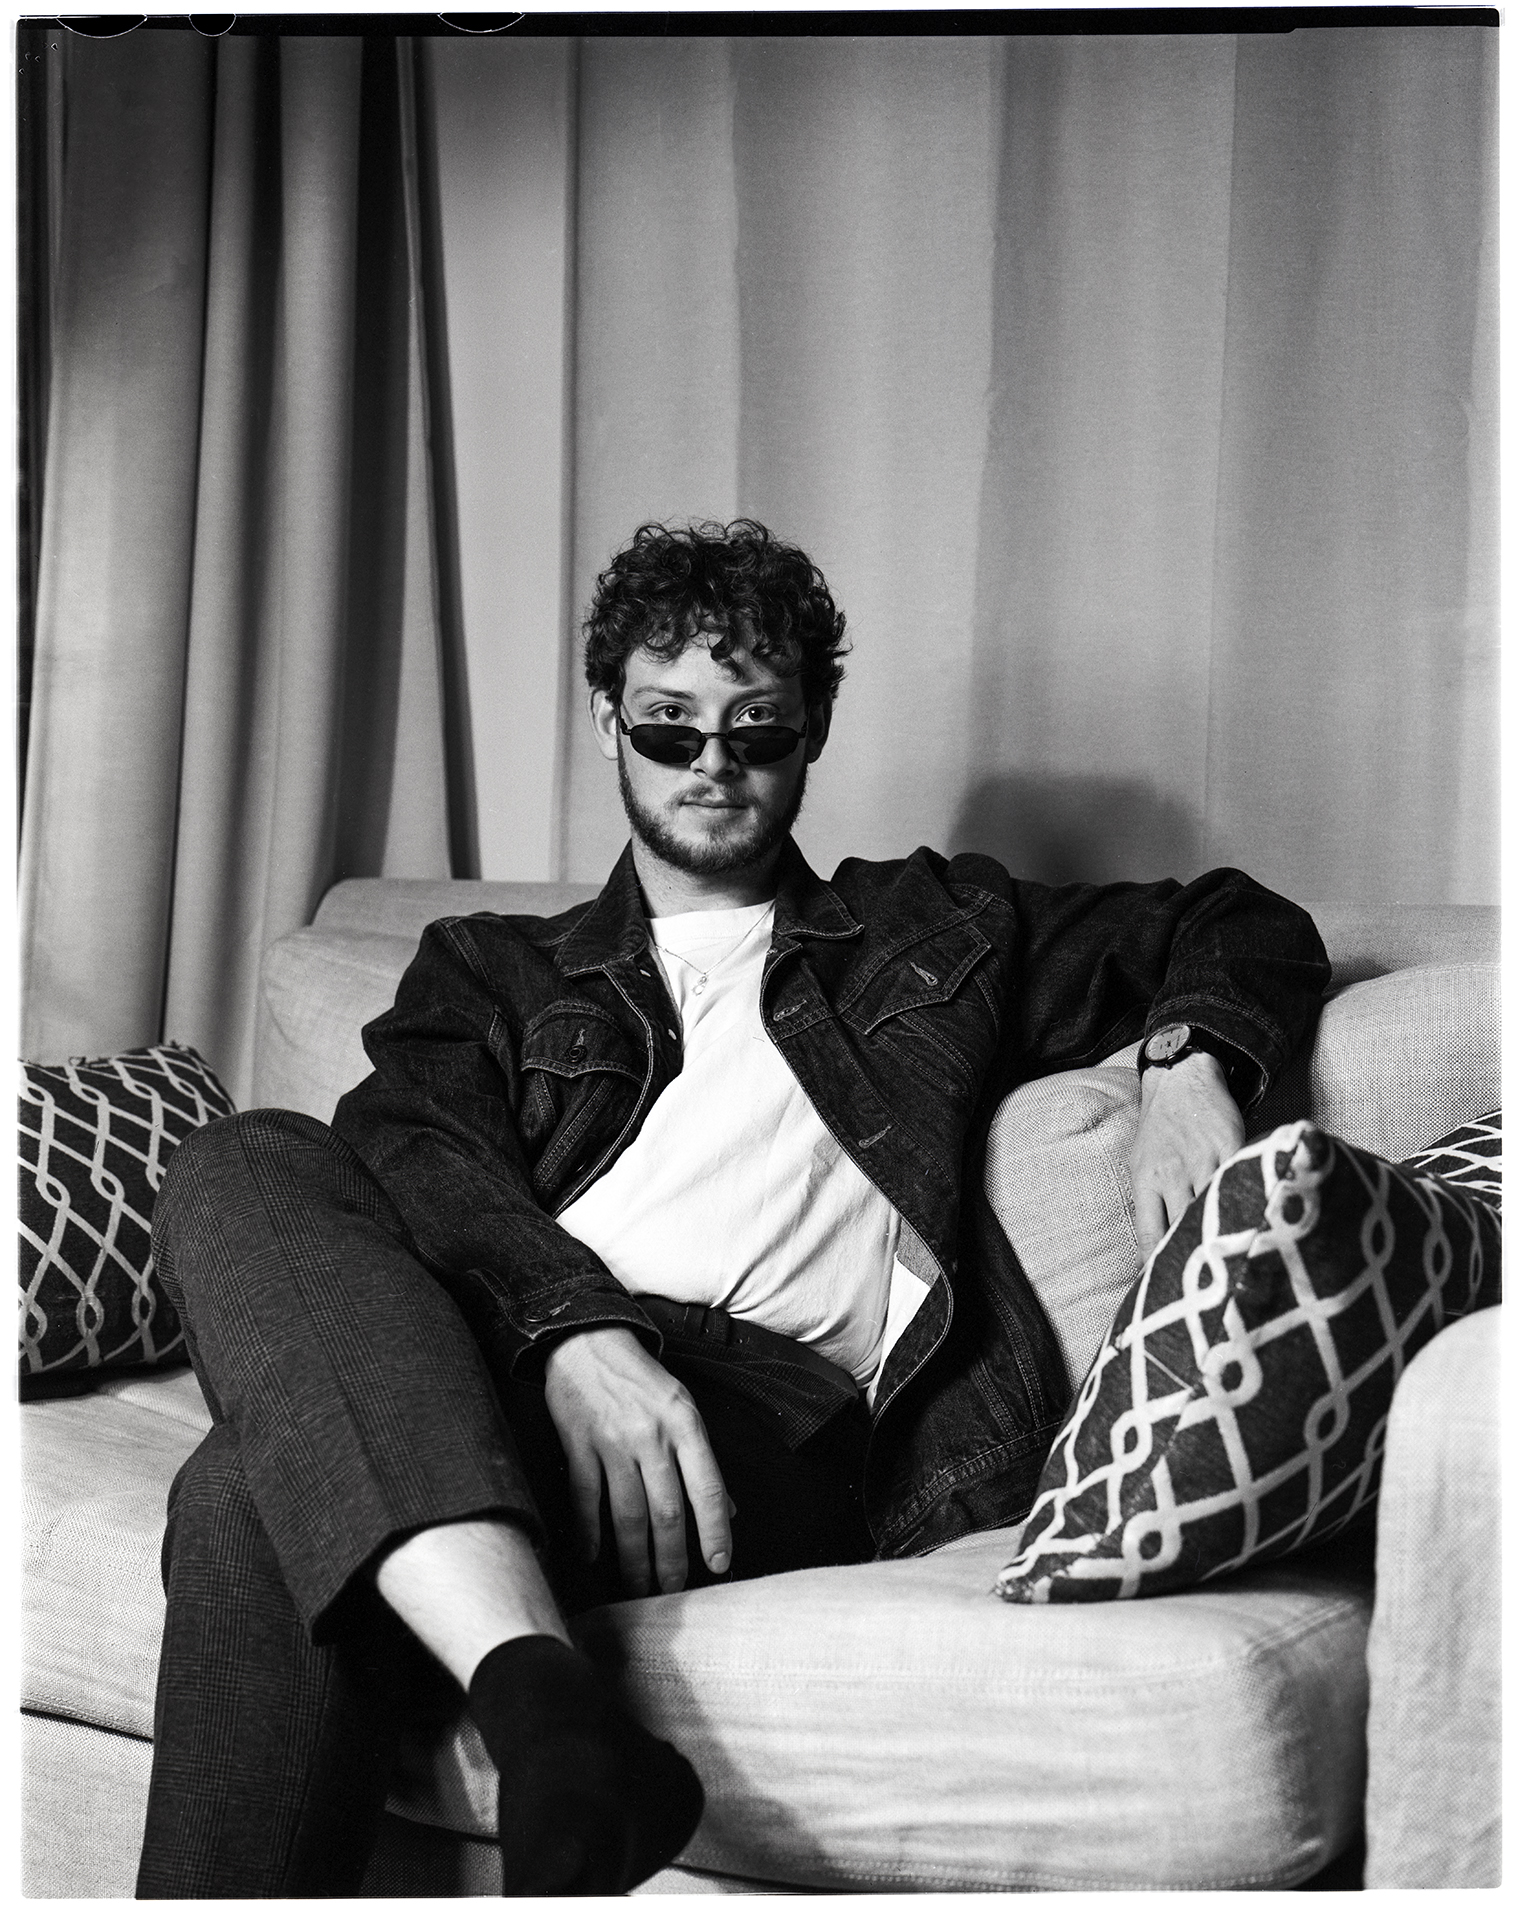 : A black and white image shot on film depicting Jamie, a man in his early 20’s with a beard and short curly hair. Jamie is sitting on a couch in front of a curtain looking directly into the camera. His legs are crossed and he has a straight face. He is wearing a denim jacket with a white t-shirt underneath paired with dark pants as well as thin sunglasses under his eyes.